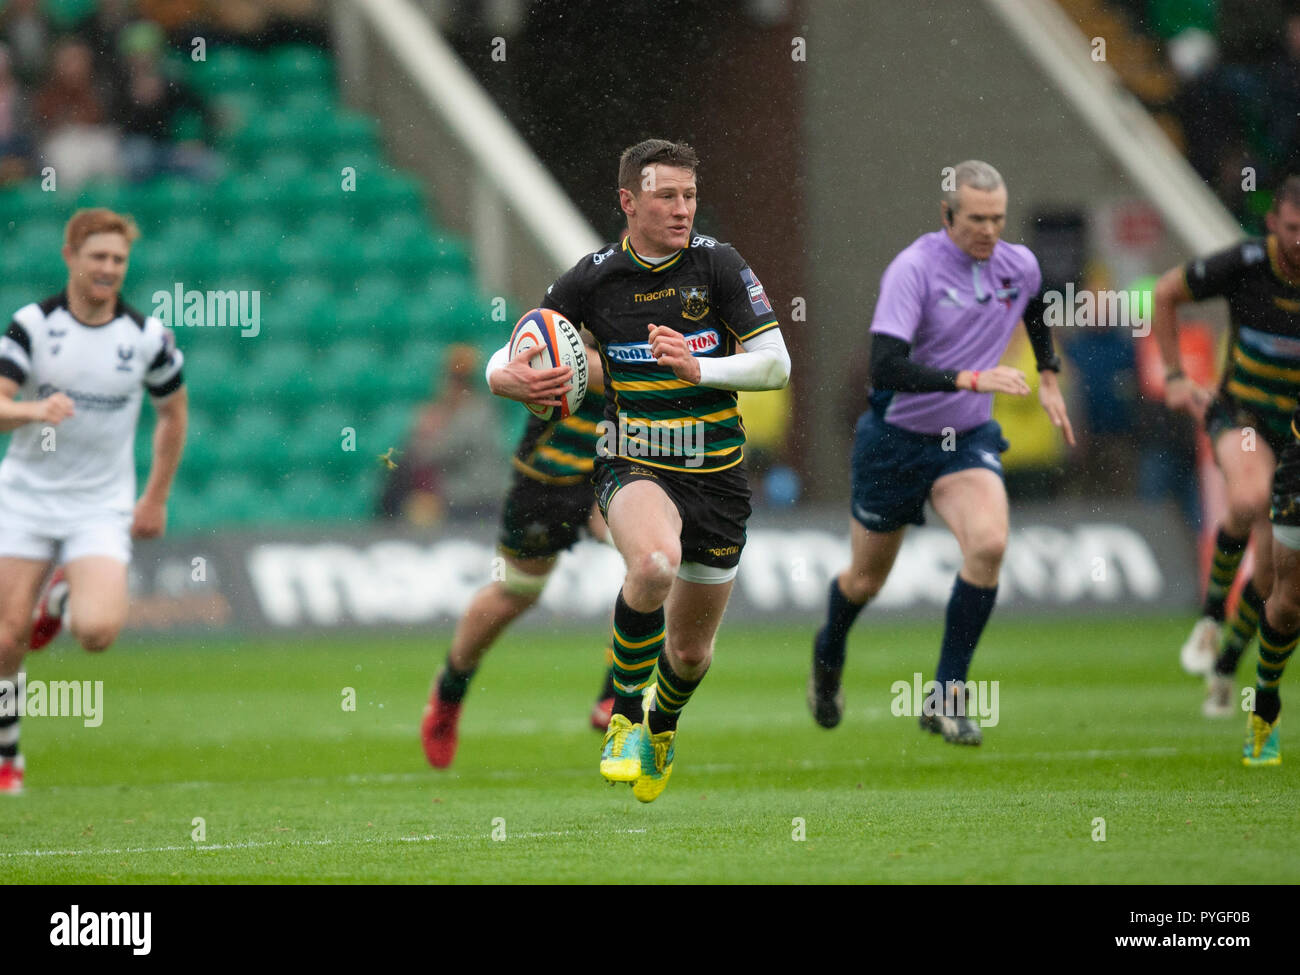 Northampton, UK. 27th October 2018. Fraser Dingwall of Northampton Saints during the Premiership Rugby Cup match between Northampton Saints and Bristol Bears. Andrew Taylor/Alamy Live News Stock Photo